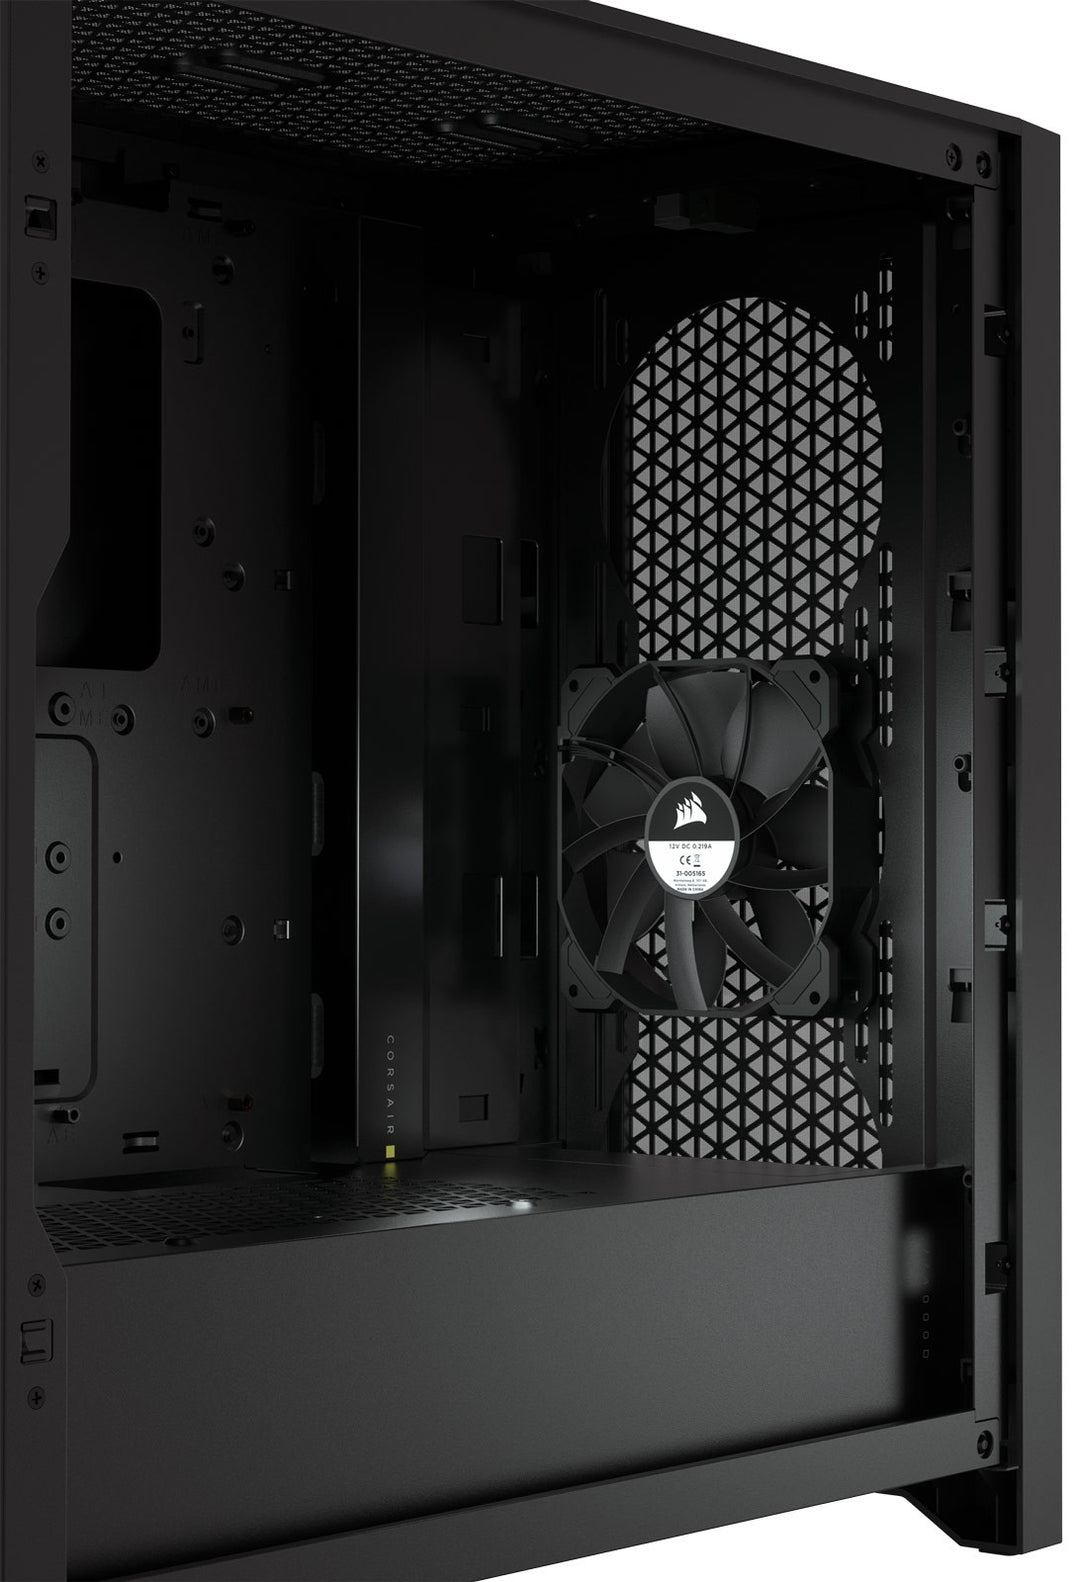 4000D Airflow Tempered Glass Mid-Tower; Black